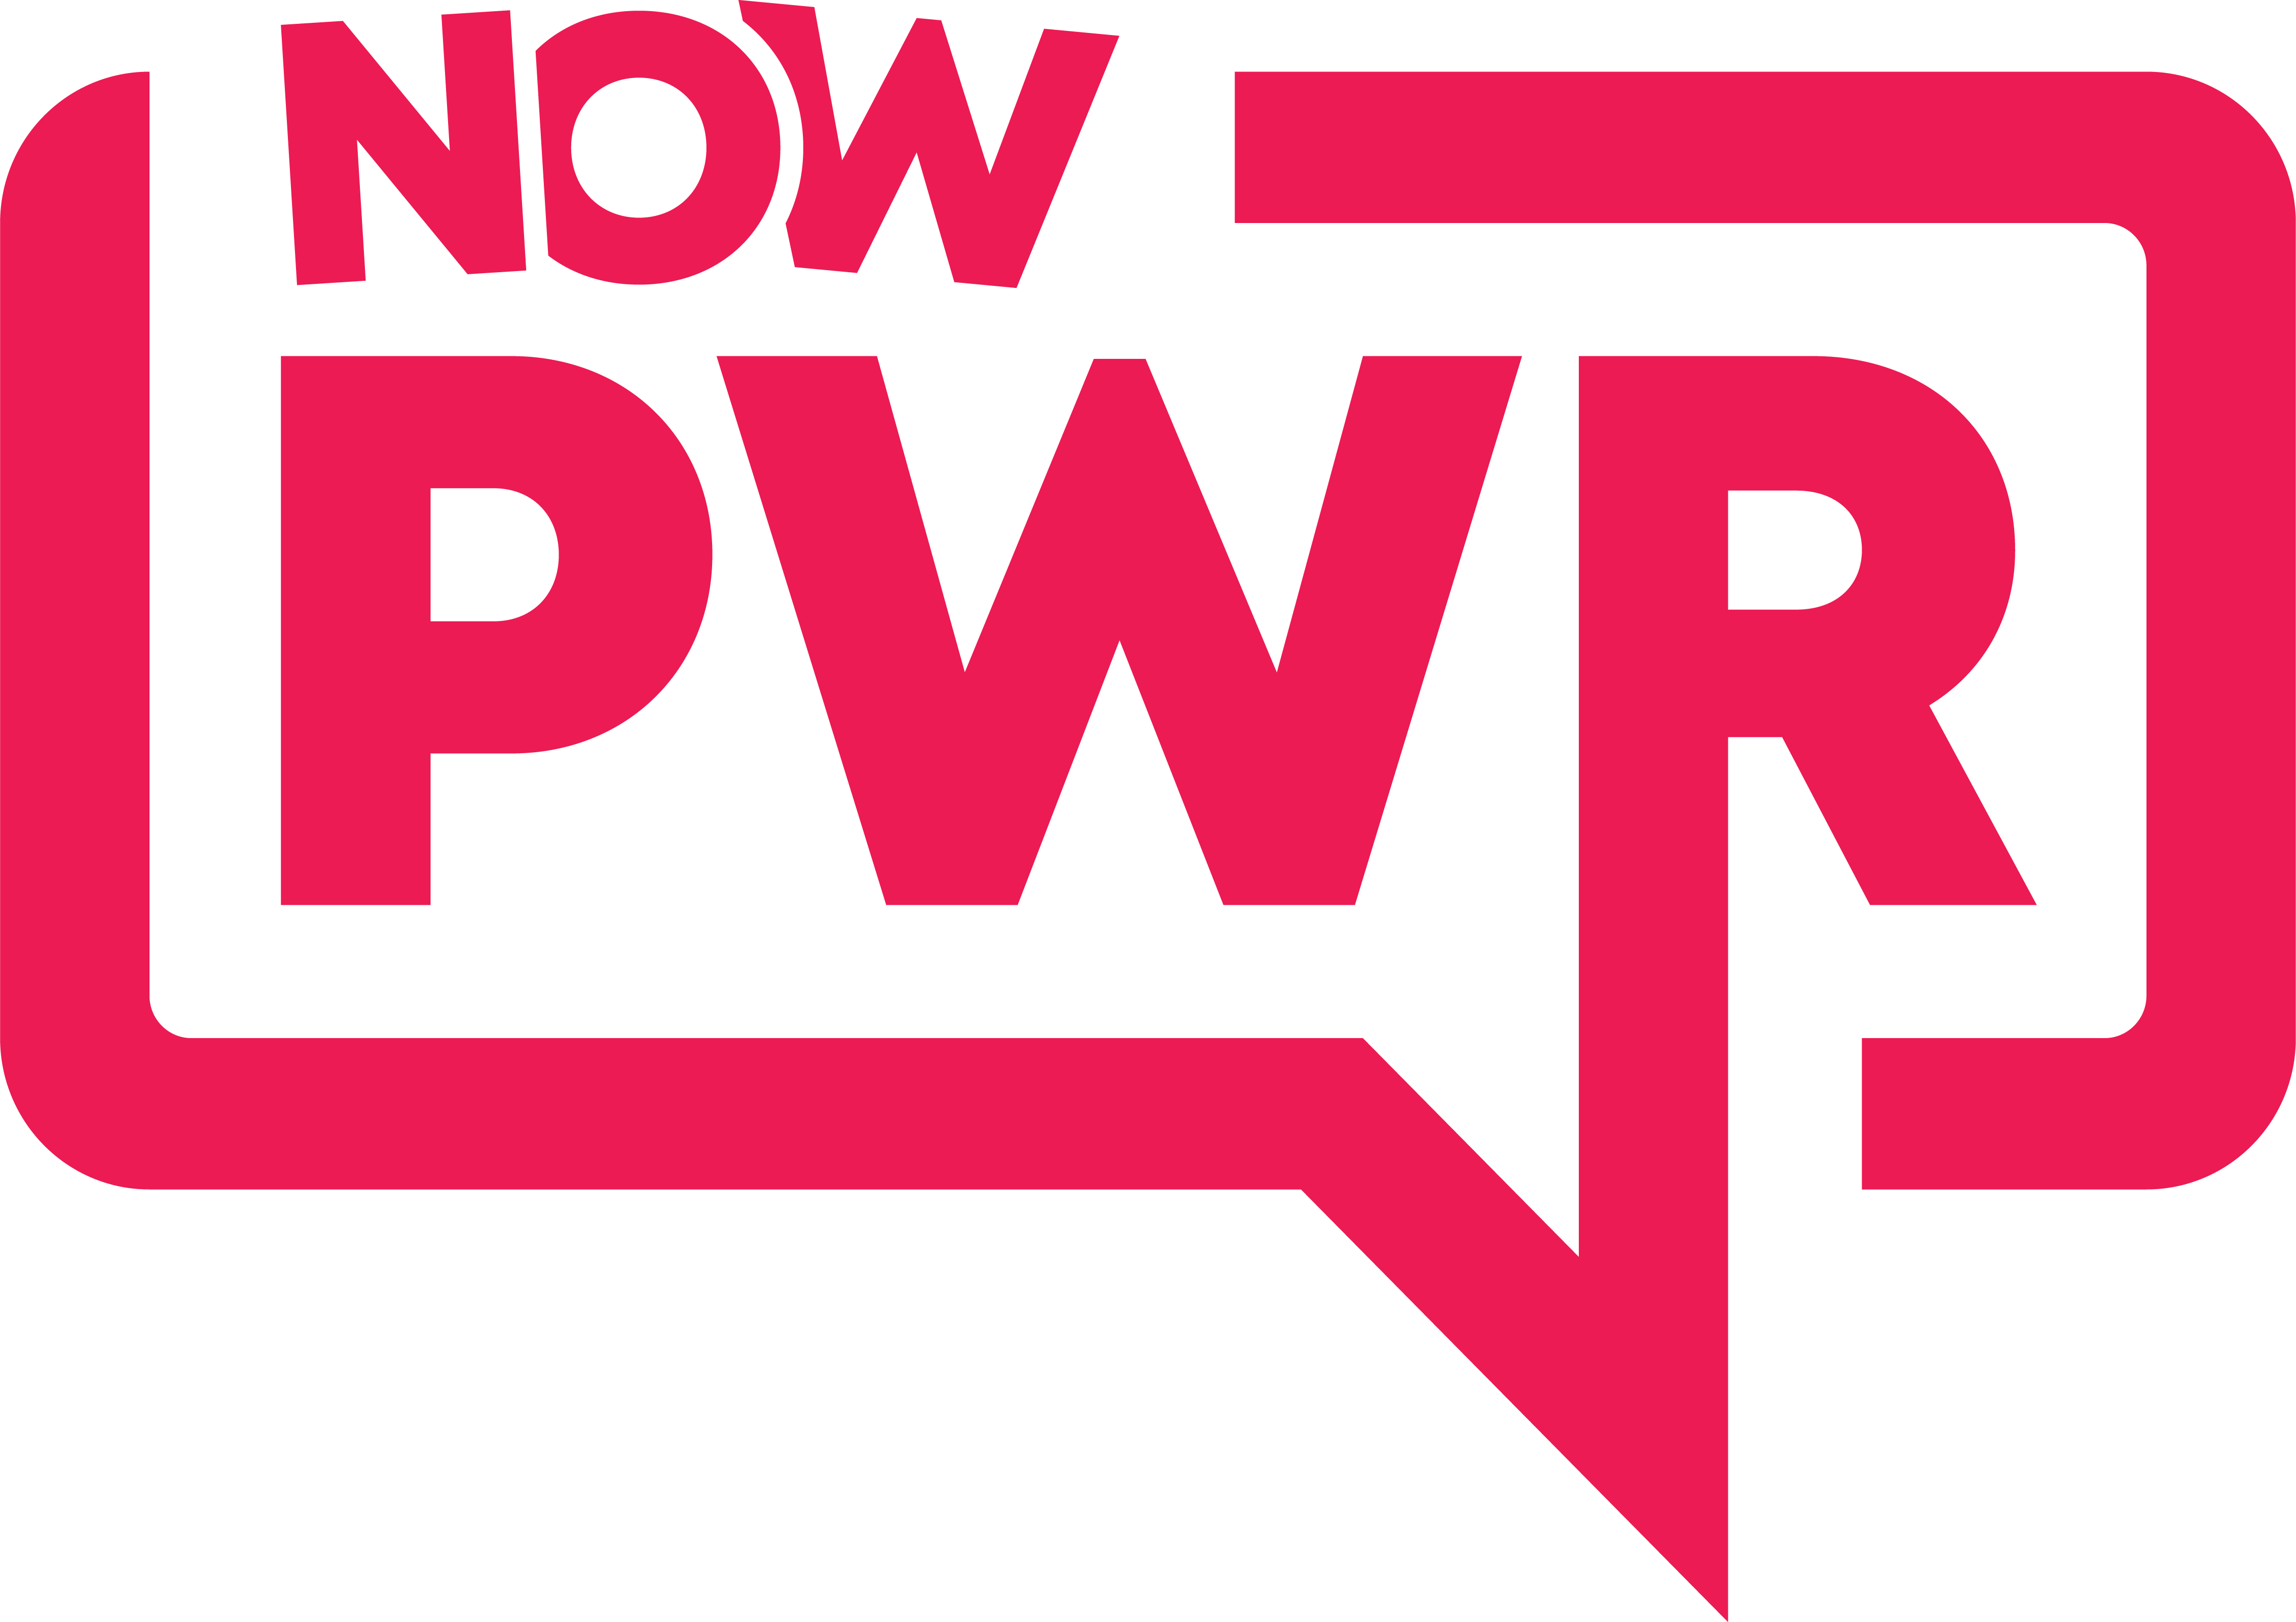 NowPWR